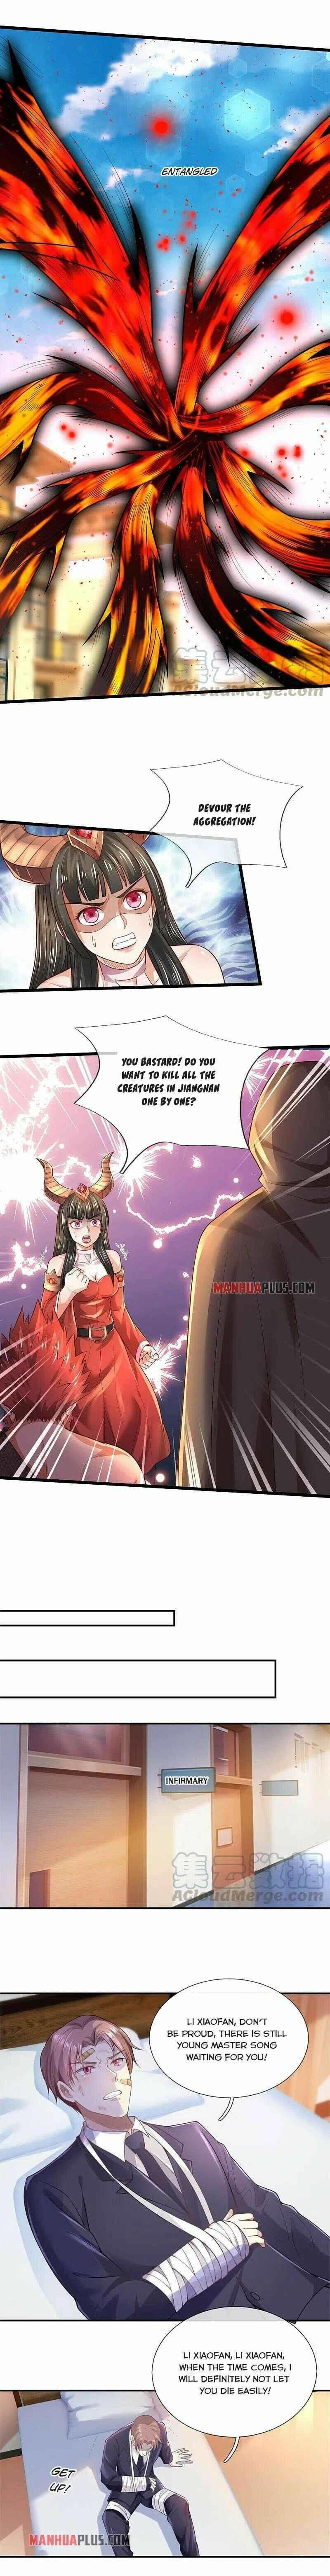 Read I'm The Great Immortal I'm The Great Immortal Chapter 334 3